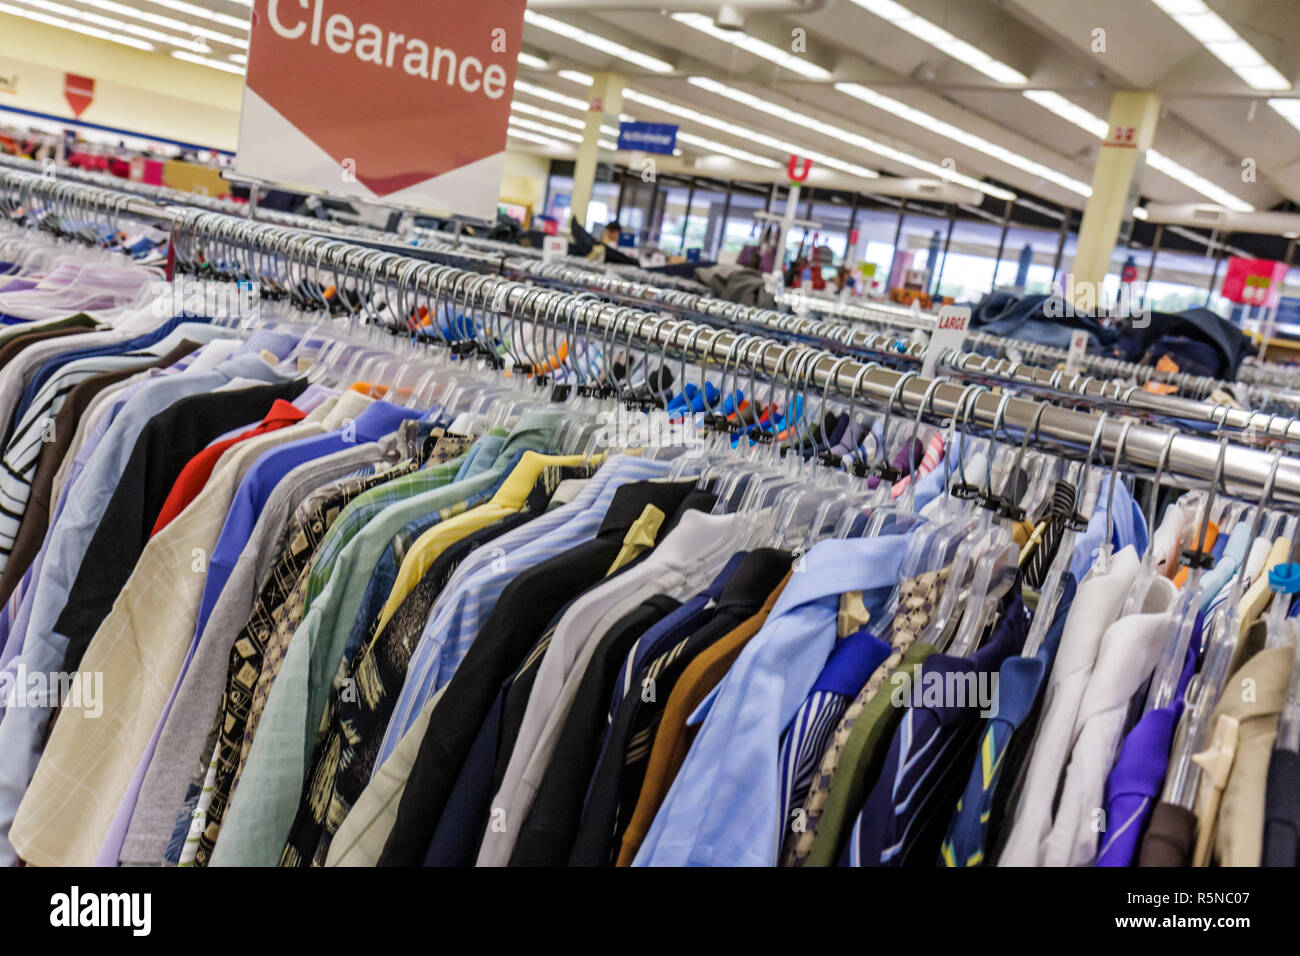 Miami Florida,Marshalls Department Store,discount department store,off  price,man's,men's shirts,clothes rack,hanger,luxury,well  dressed,variety,shoppi Stock Photo - Alamy